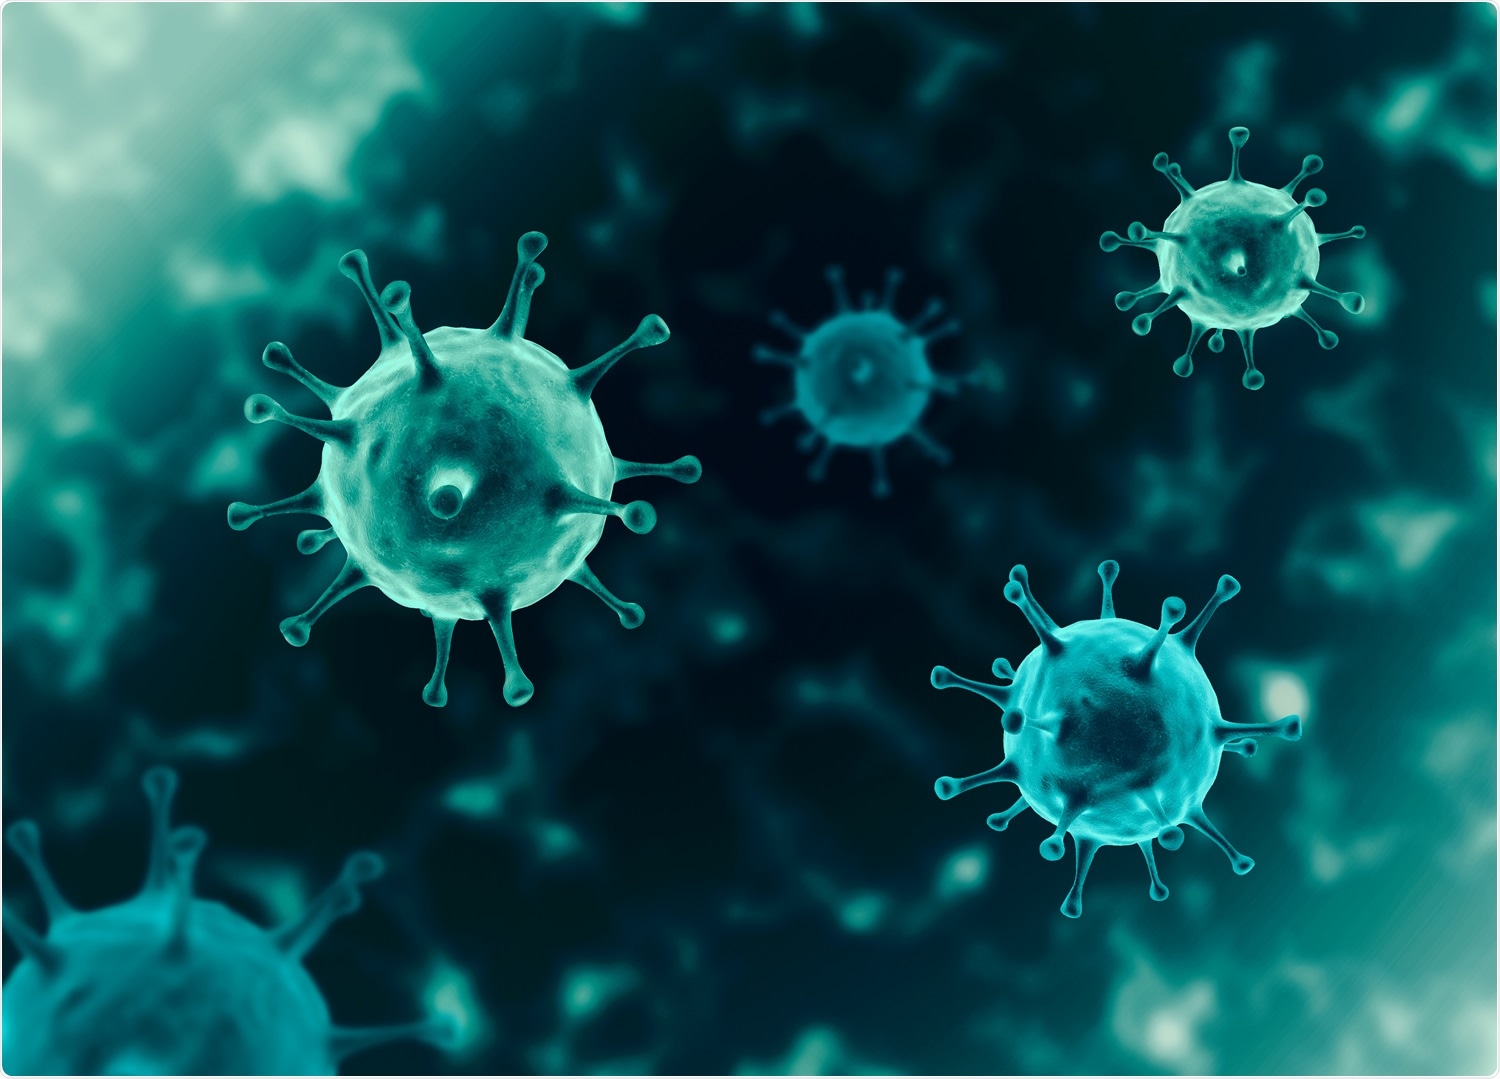 Study: The supramolecular organization of SARS-CoV and SARS-CoV-2 virions revealed by coarse-grained models of intact virus envelopes. Image Credit: Nhemz / Shutterstock